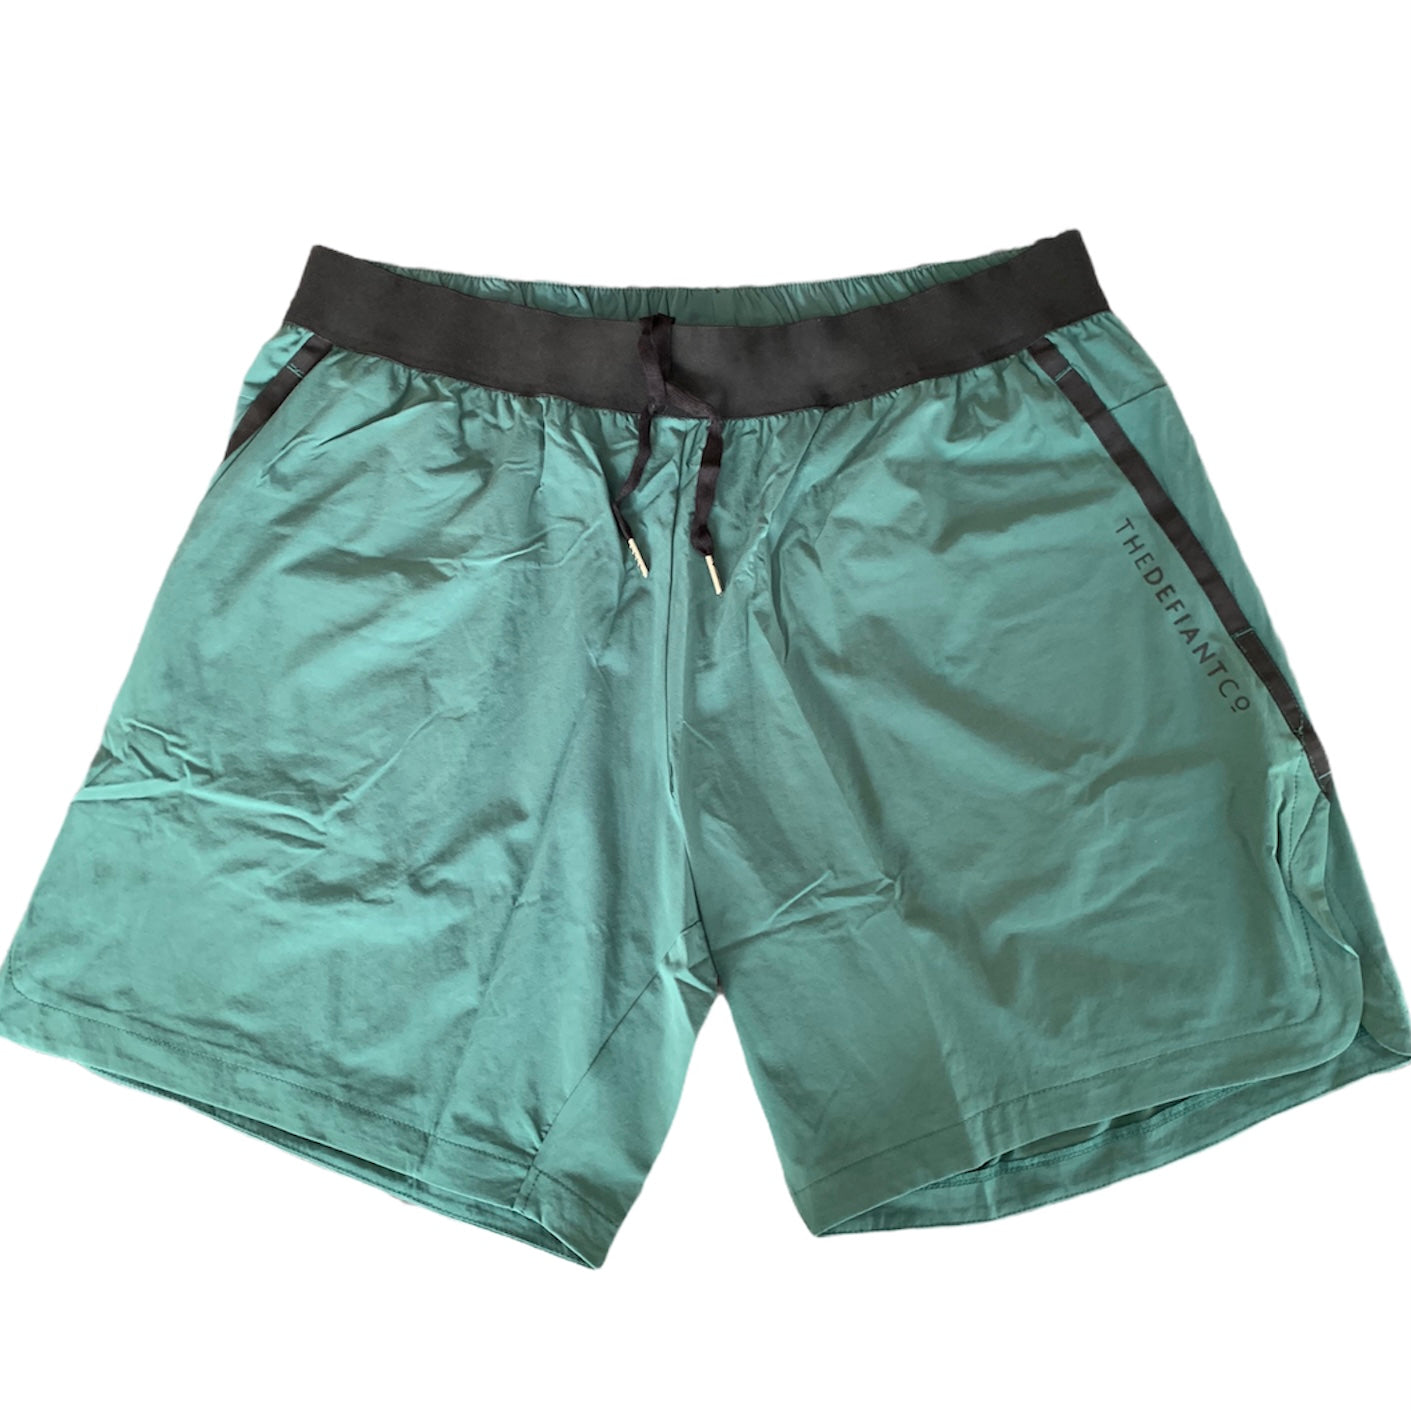 A photo of the best selling The Defiant Co Performance Shorts.  The shorts have a black elasticated waistband with draw strings and have The Defiant Co logo down the left leg.  The shorts have two pockets, one either side and are the colour racing green.